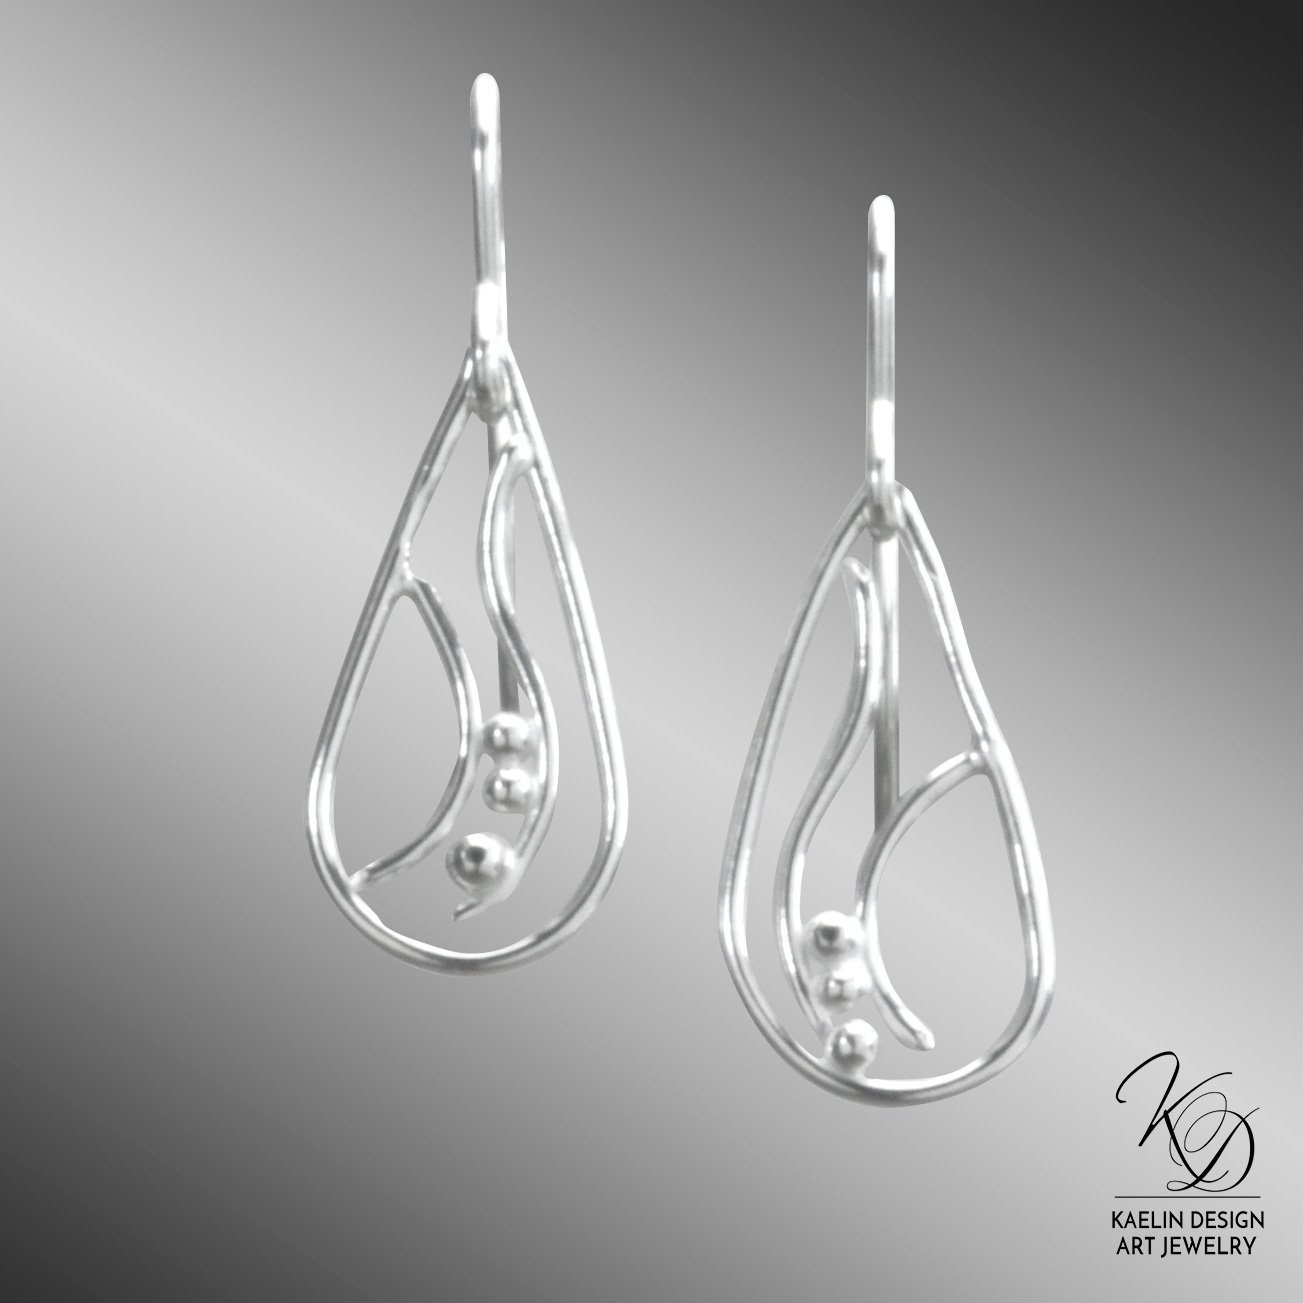 Maris Hand Forged Sterling Silver Earrings by Kaelin Design